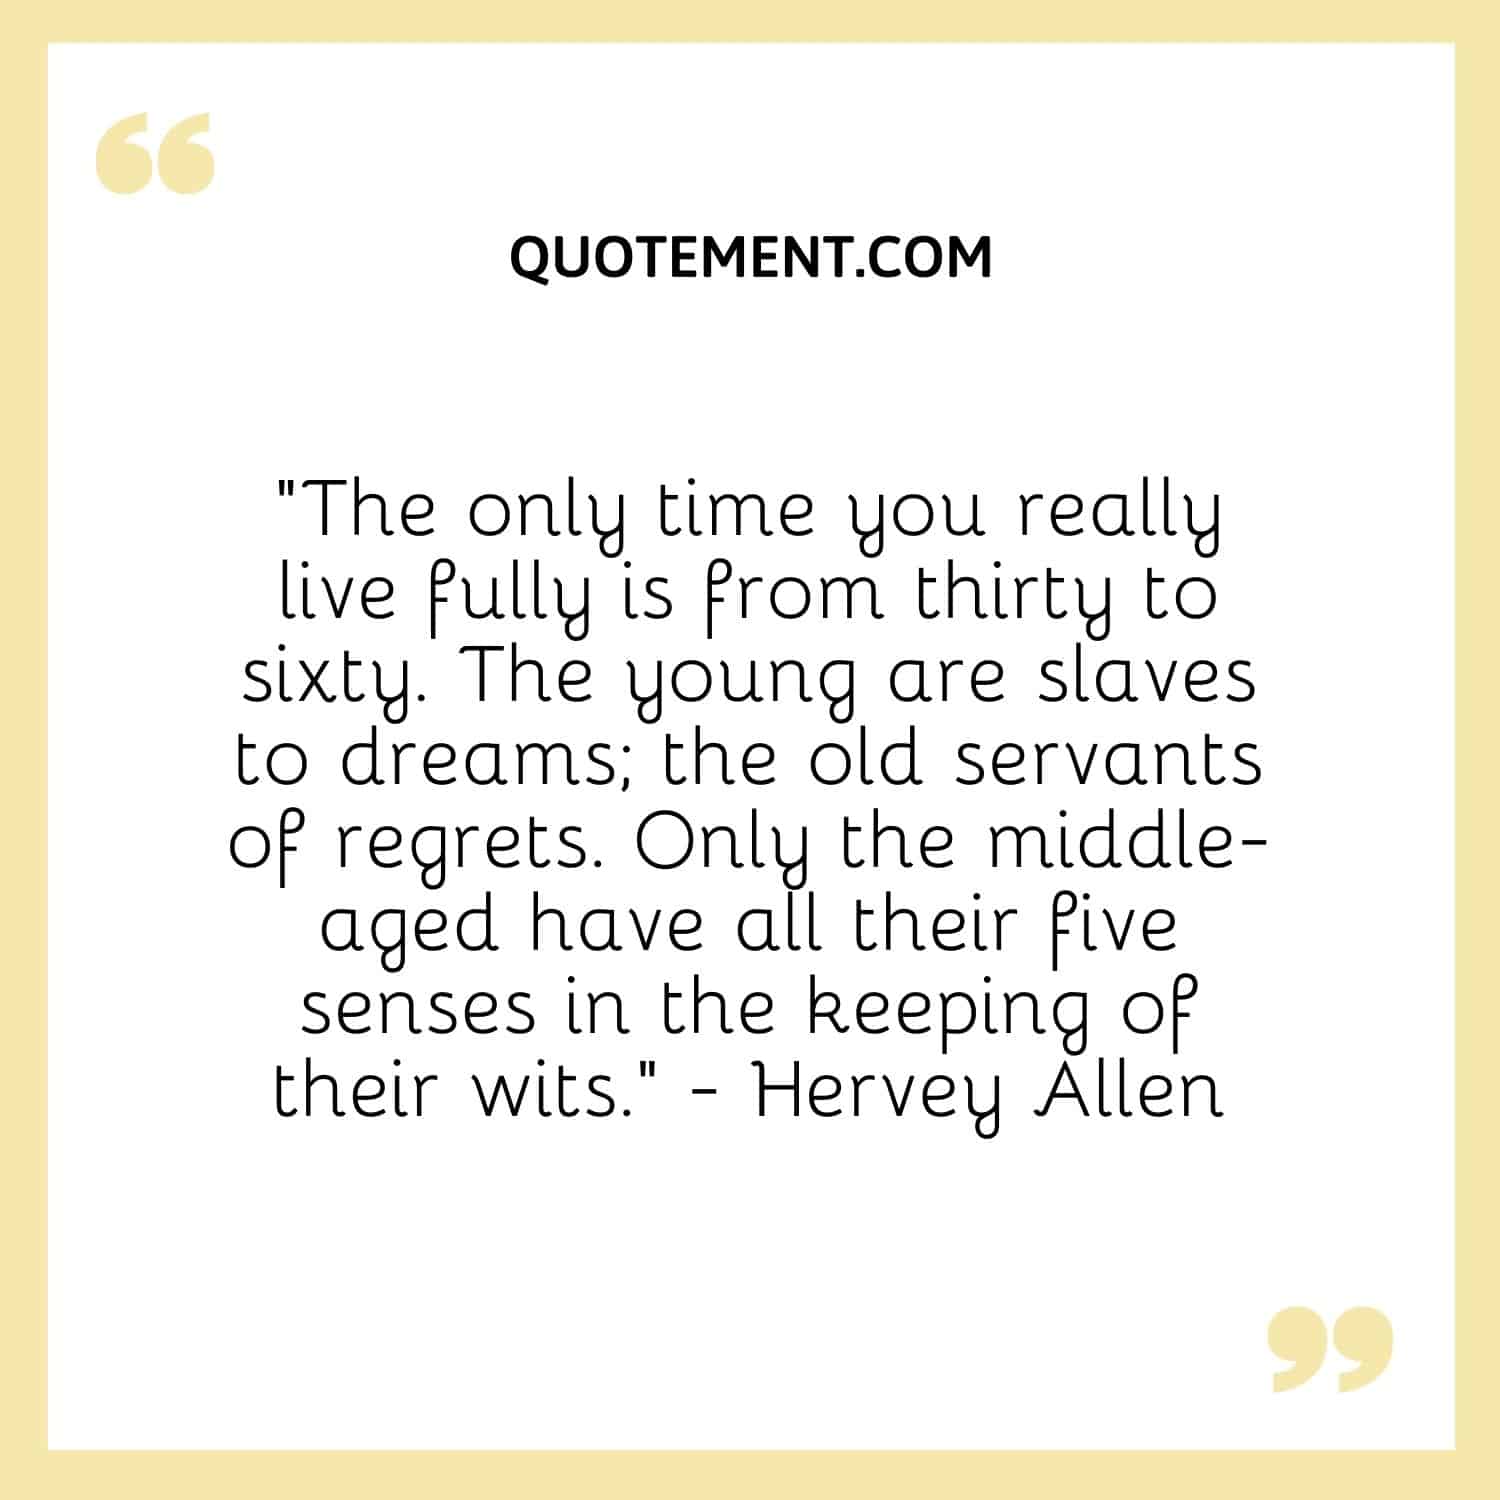 “The only time you really live fully is from thirty to sixty. The young are slaves to dreams; the old servants of regrets.